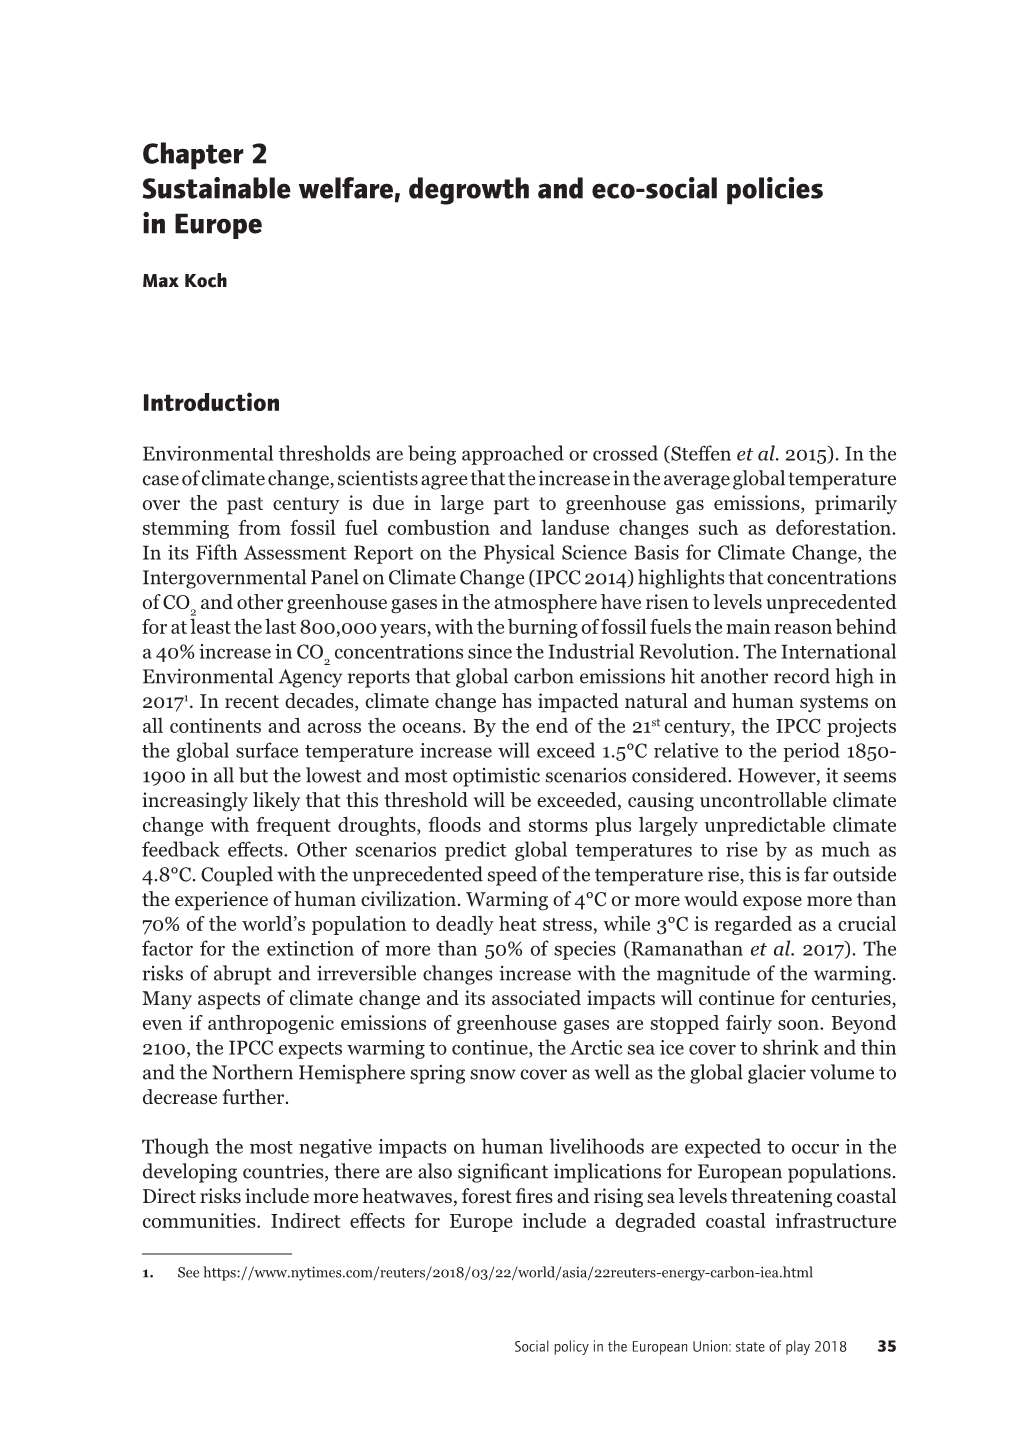 Chapter 2 Sustainable Welfare, Degrowth and Eco-Social Policies in Europe